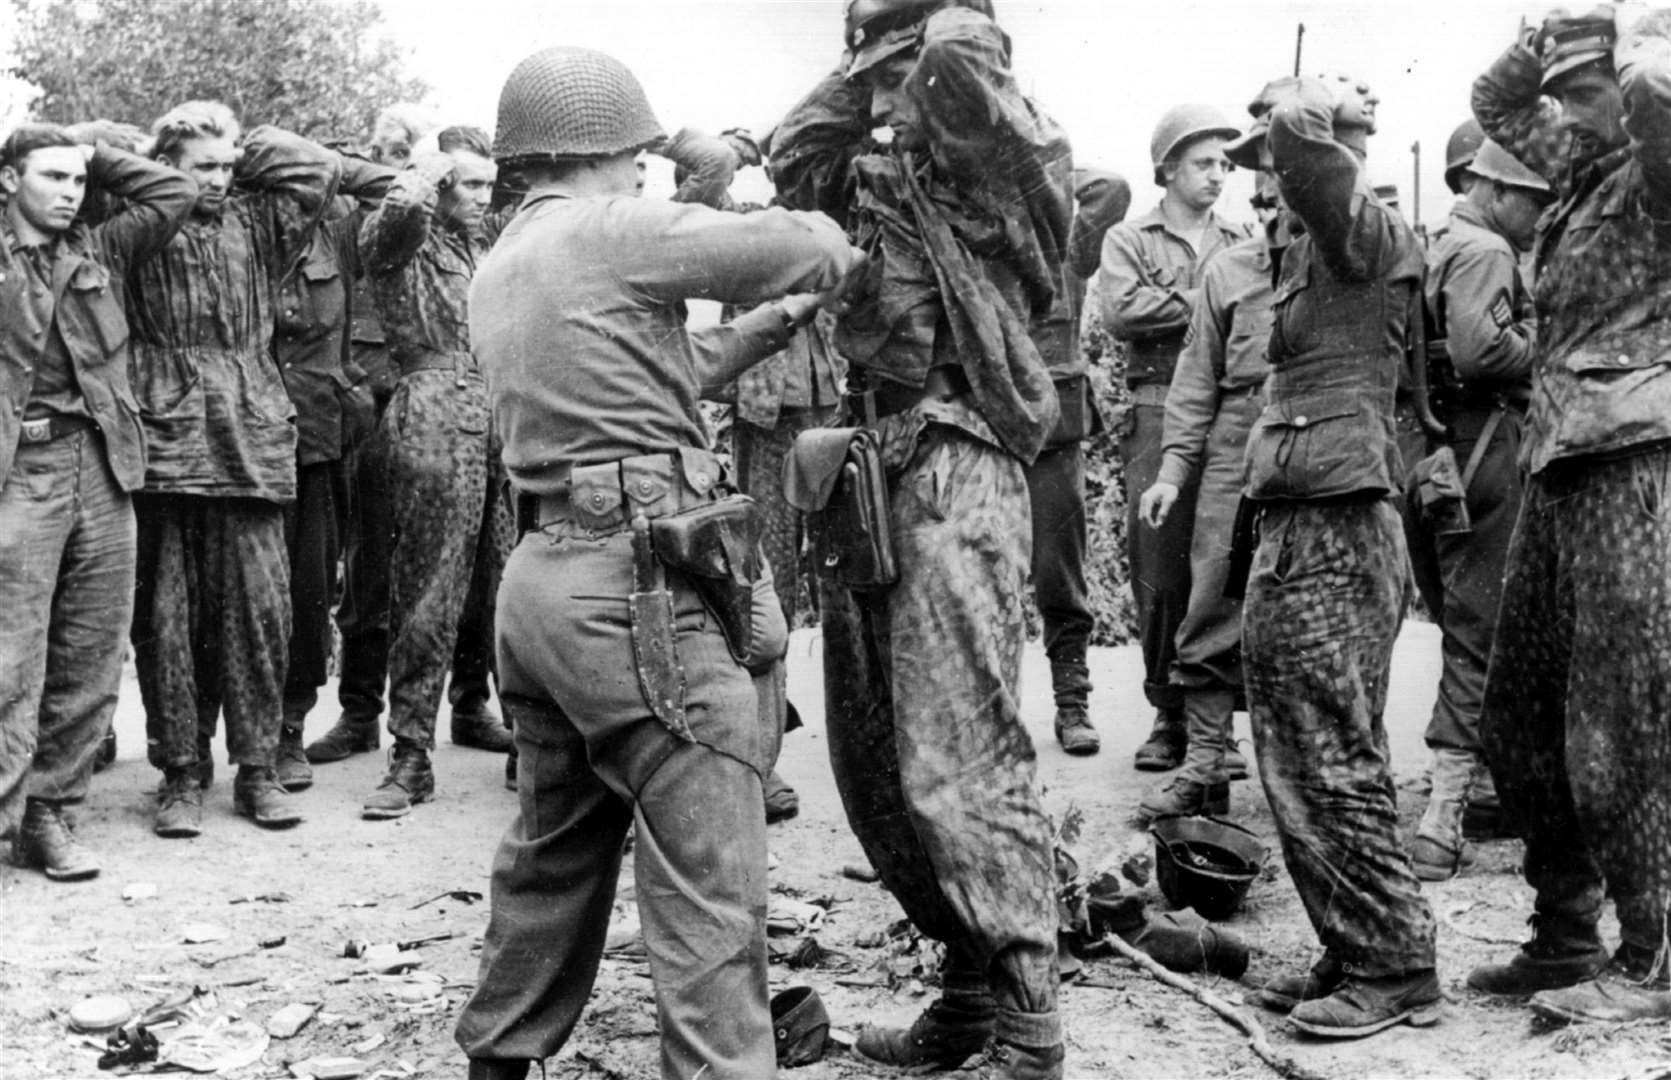 American soldiers search German prisoners from Normandy in the wake of the D-Day Landings of June 1944